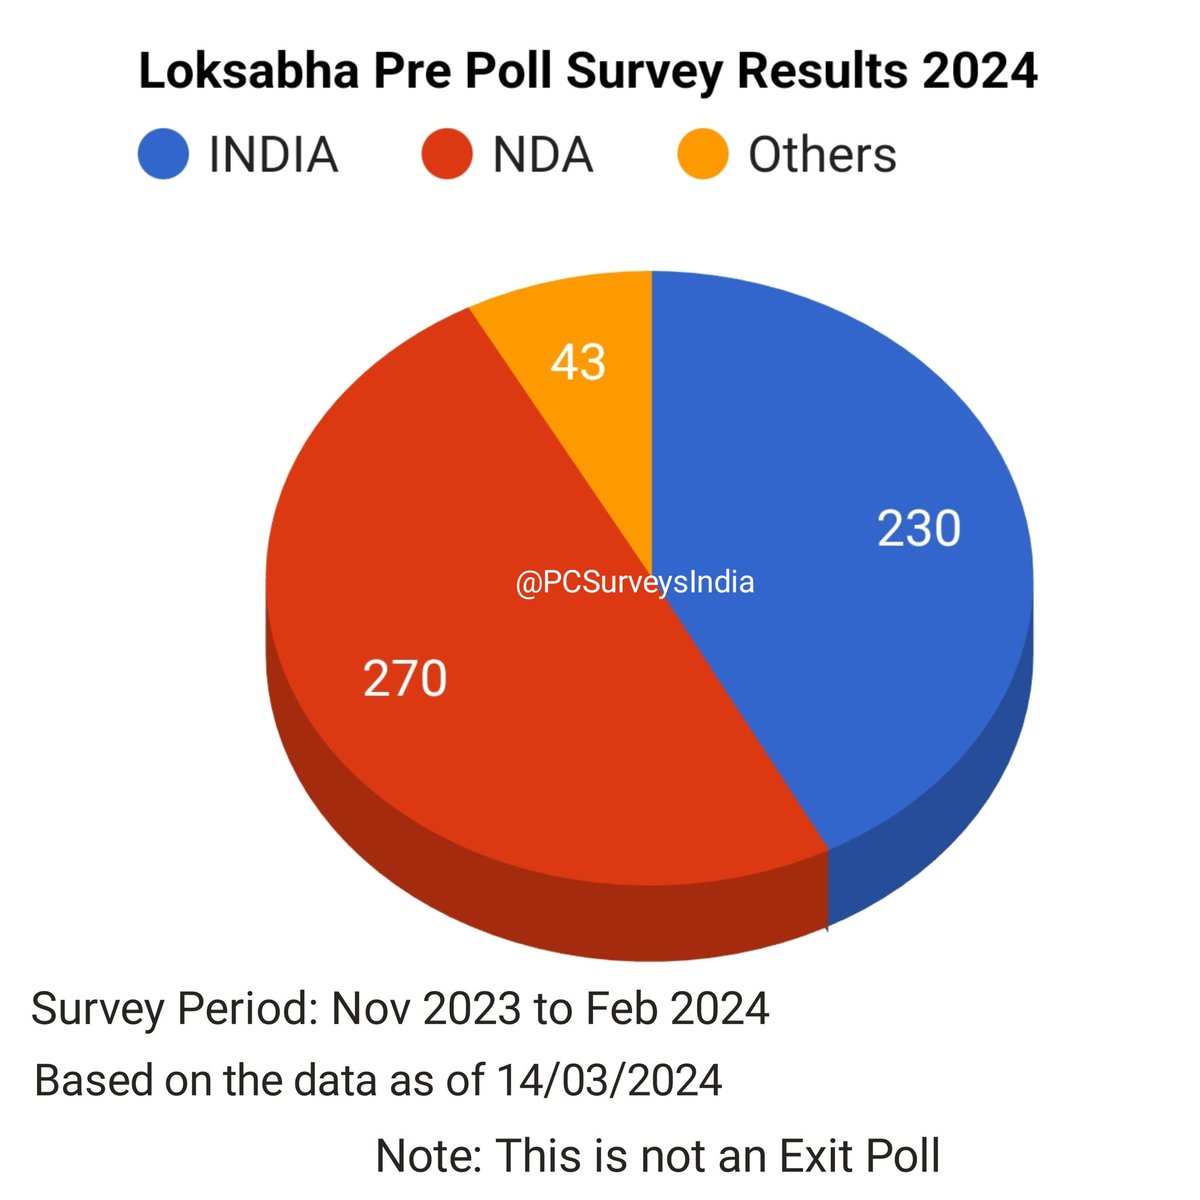 Loksabha pre poll survey results 2024.

We have done a deep survey from  November  2023 to February  2024.

There will be a high chance of Hung  in Loksabha. 

Expected seat share:

INDIA: 225 - 235
NDA: 265 - 275
Others: 41 - 45

5 important factors that cause anty incumbency.